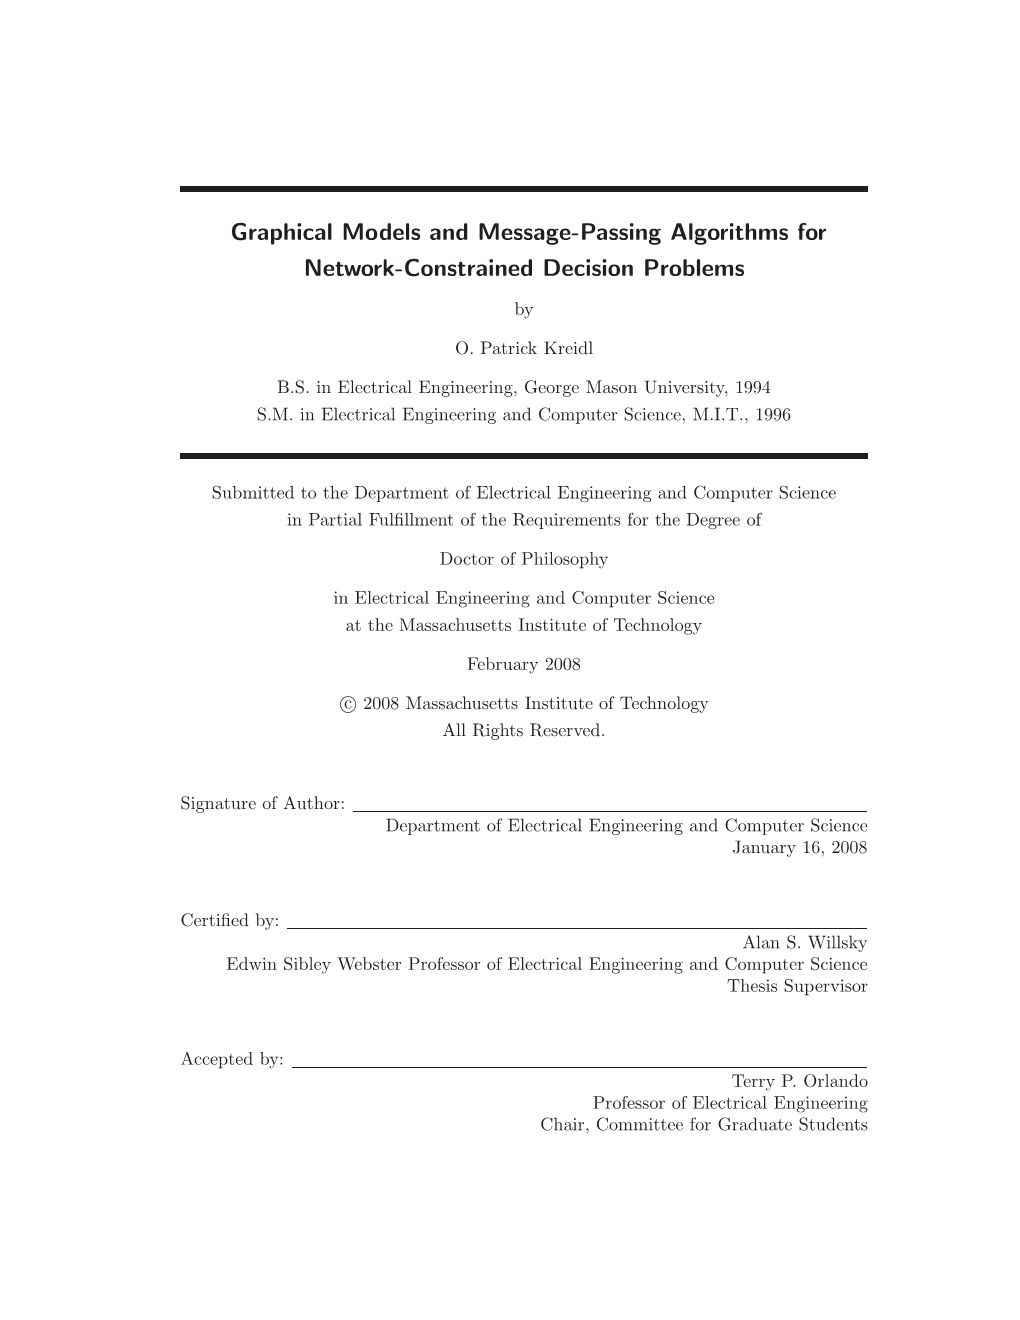 Graphical Models and Message-Passing Algorithms for Network-Constrained Decision Problems